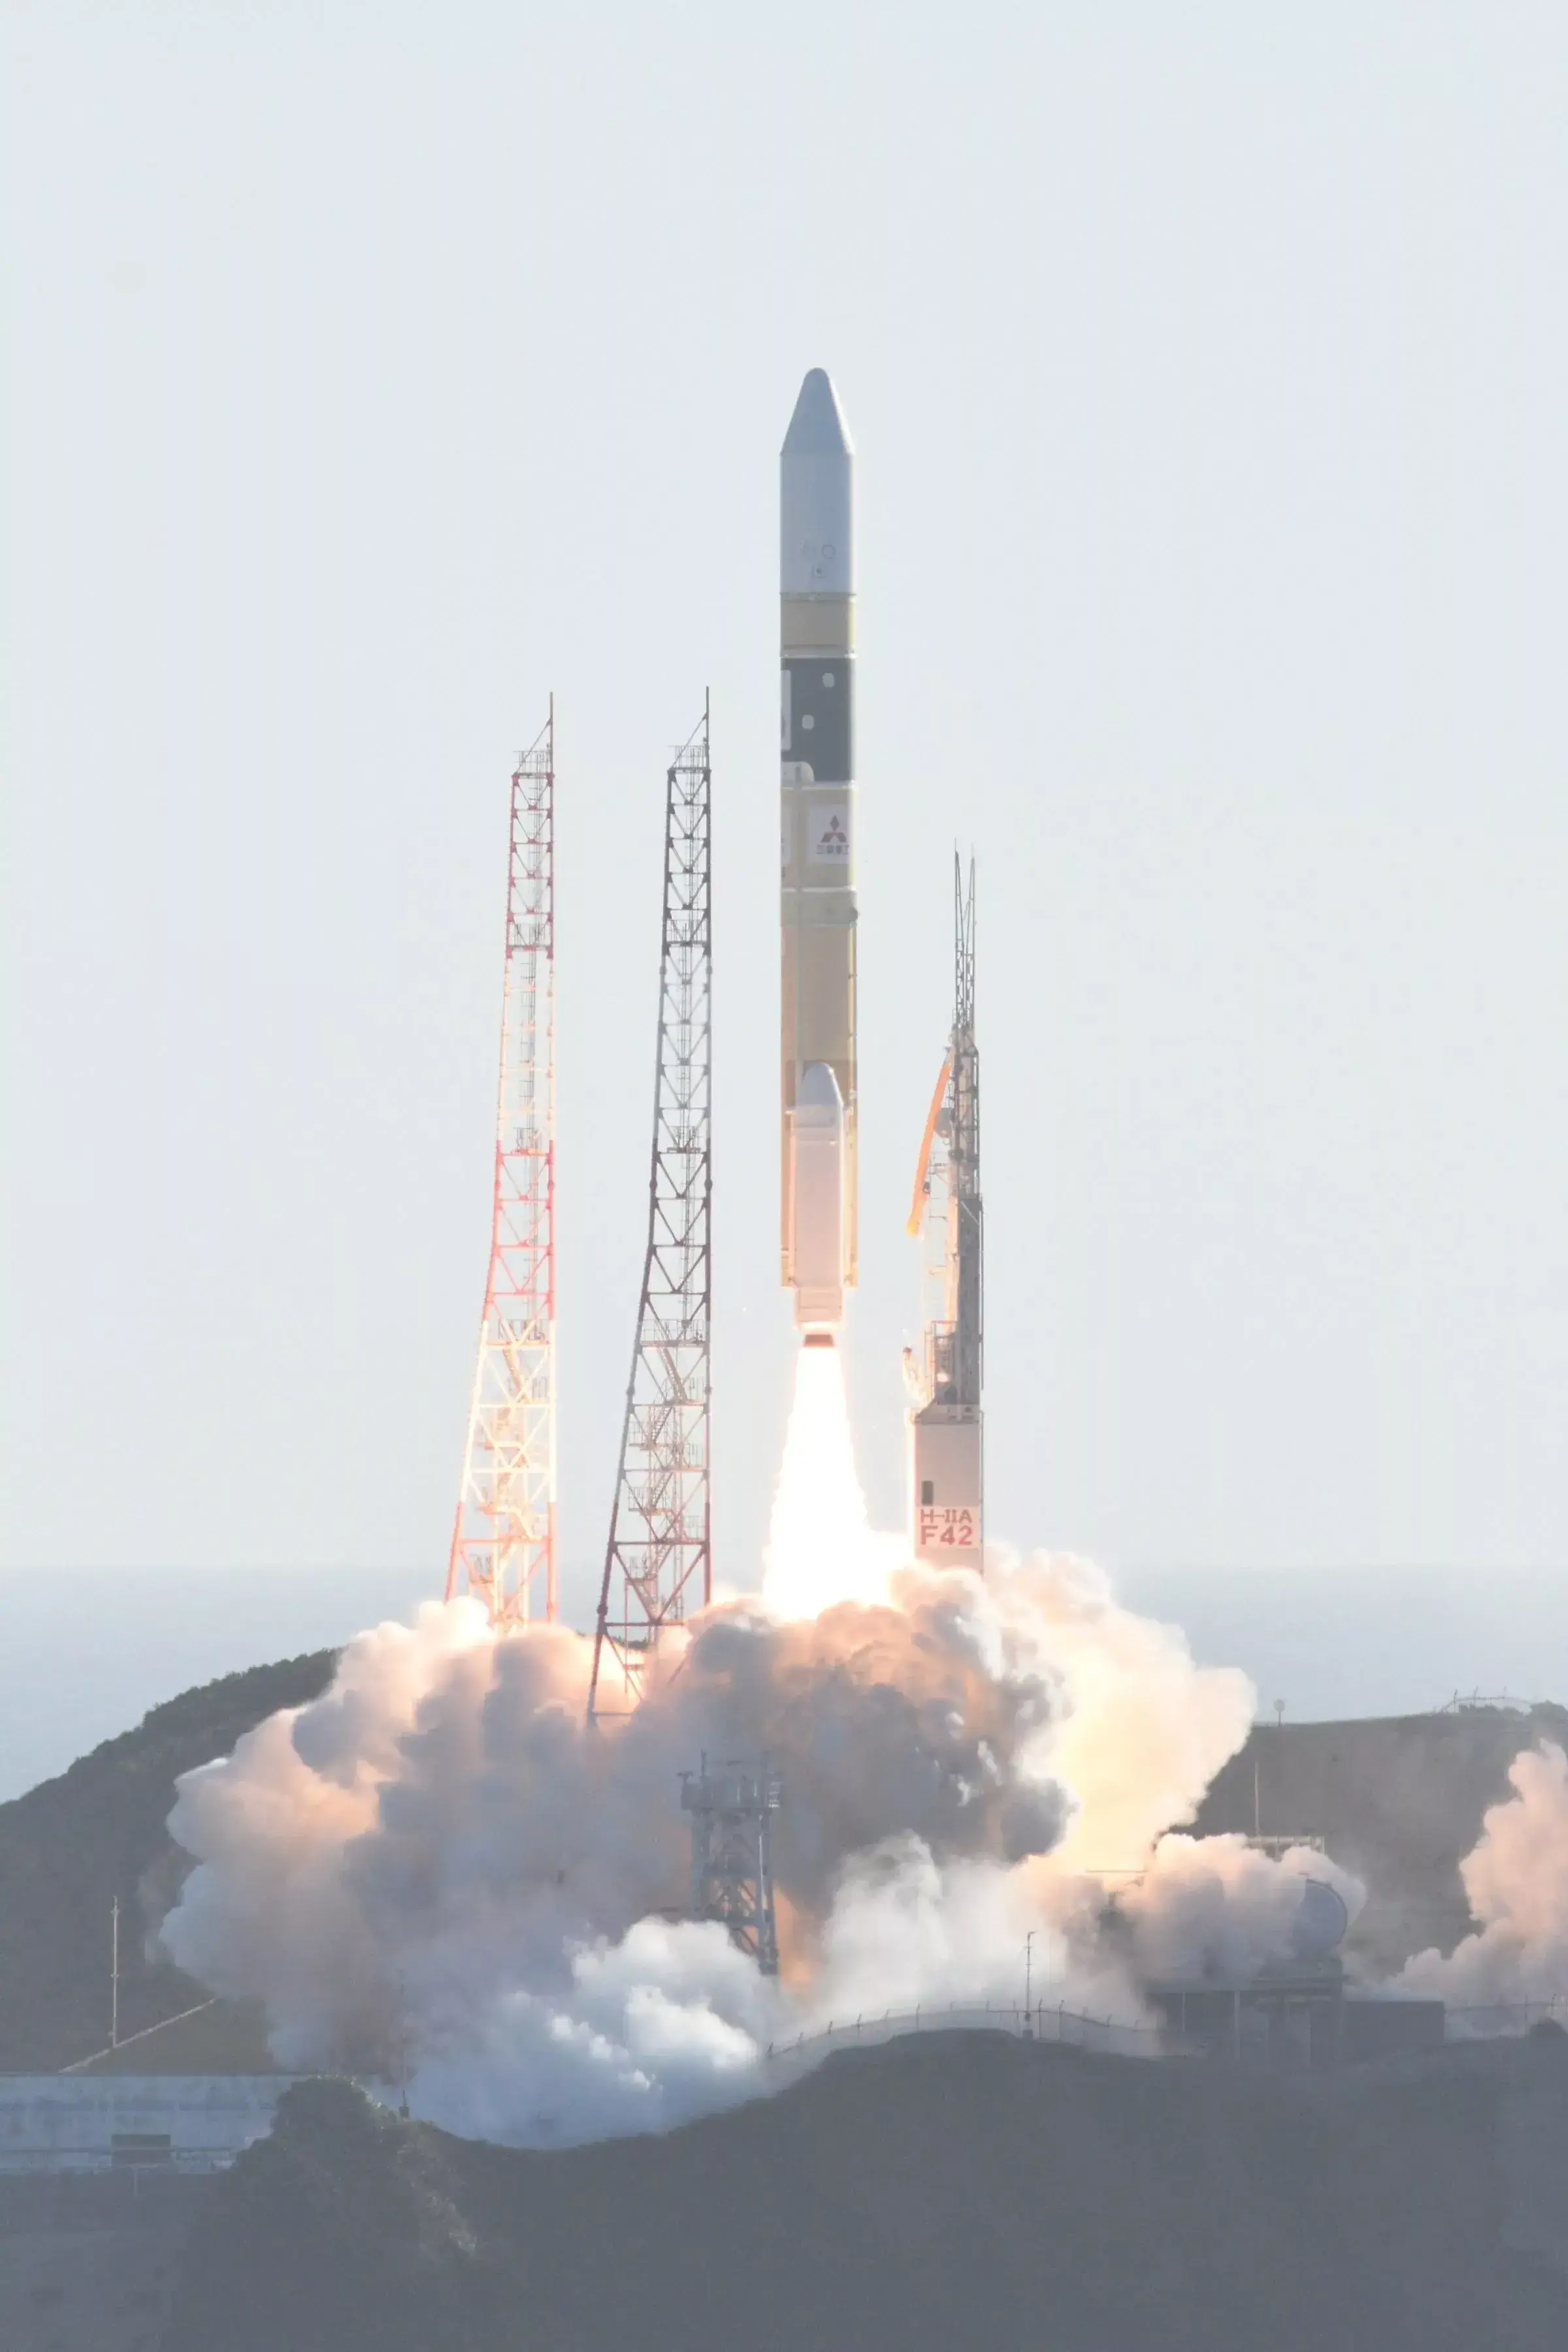 LAUNCH OF UNITED ARAB EMIRATES HOPE MARS MISSION A Japanese H-IIA rocket blasts off carrying Hope, the United Arab Emirates’ Mars mission, on 19 July 2020. Mitsubishi Heavy Industries
